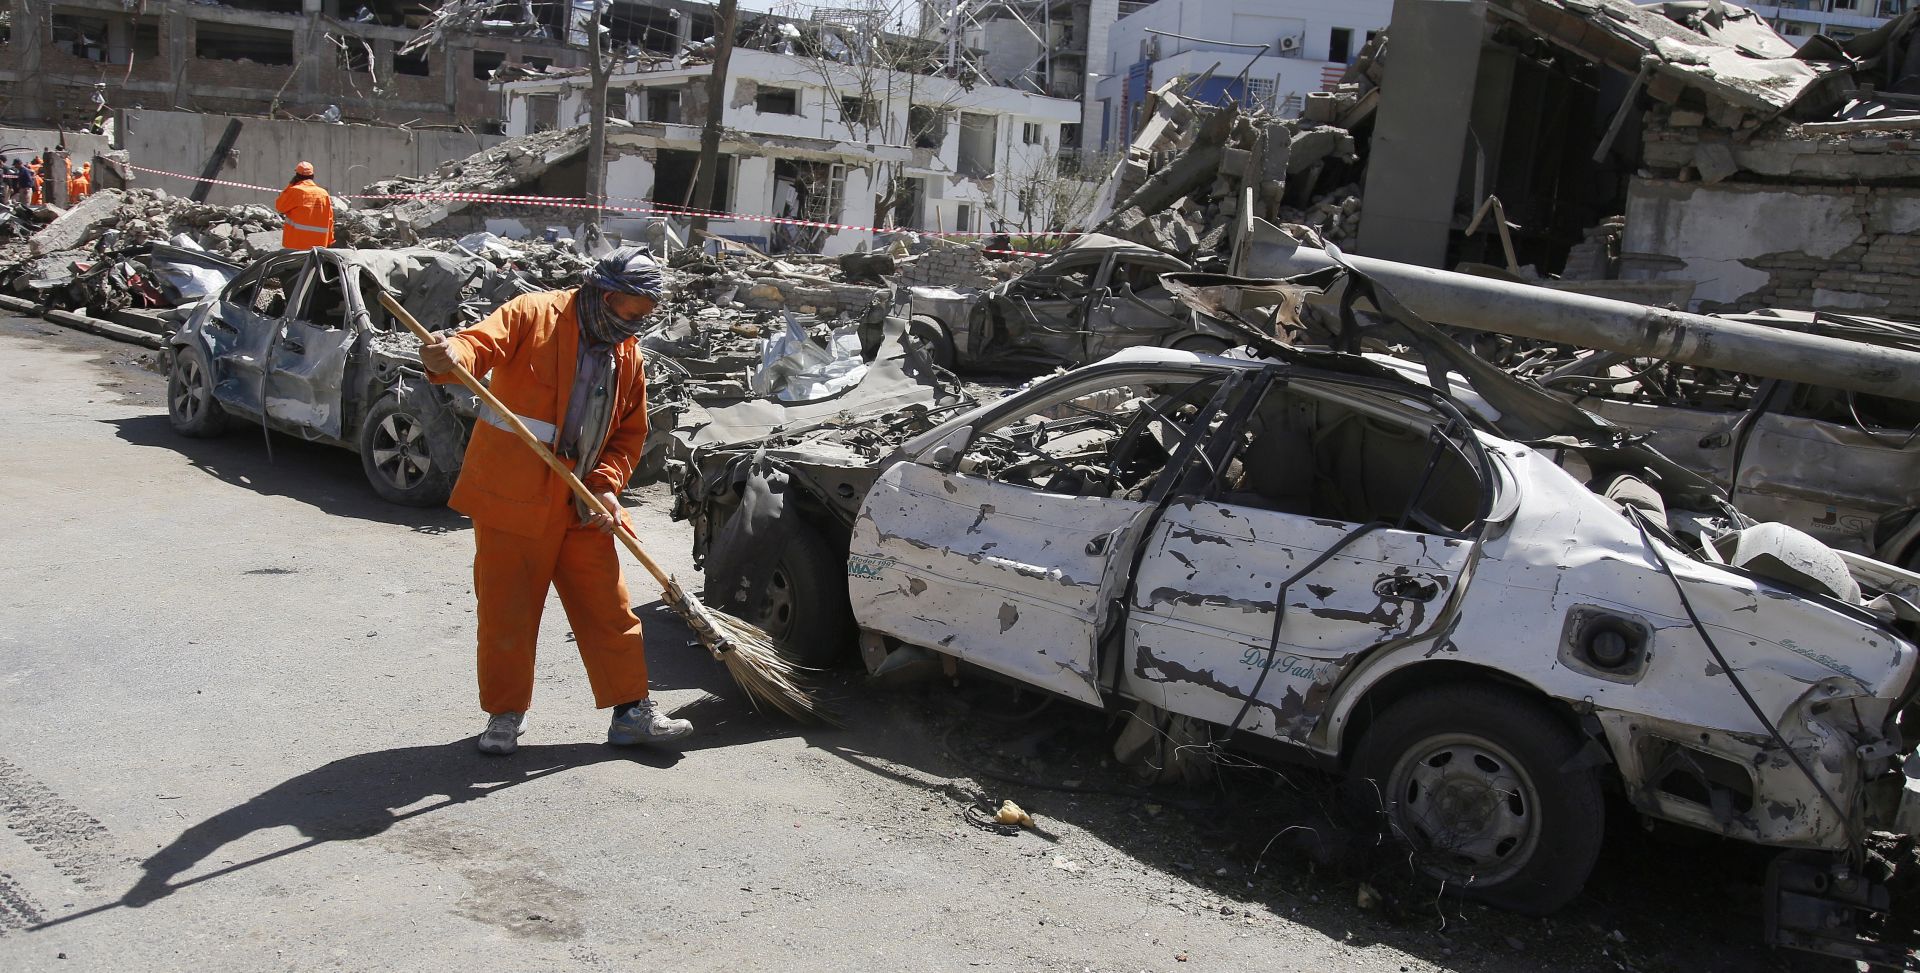 epa06001061 Afghan workers clean the scene of a suicide bomb attack nearby the German embassy in Kabul, Afghanistan, 31 May 2017. At least 80 people were killed and more than 350 wounded n a suicide bomb attack near the foreign embassies in Kabul.  EPA/JAWAD JALALI